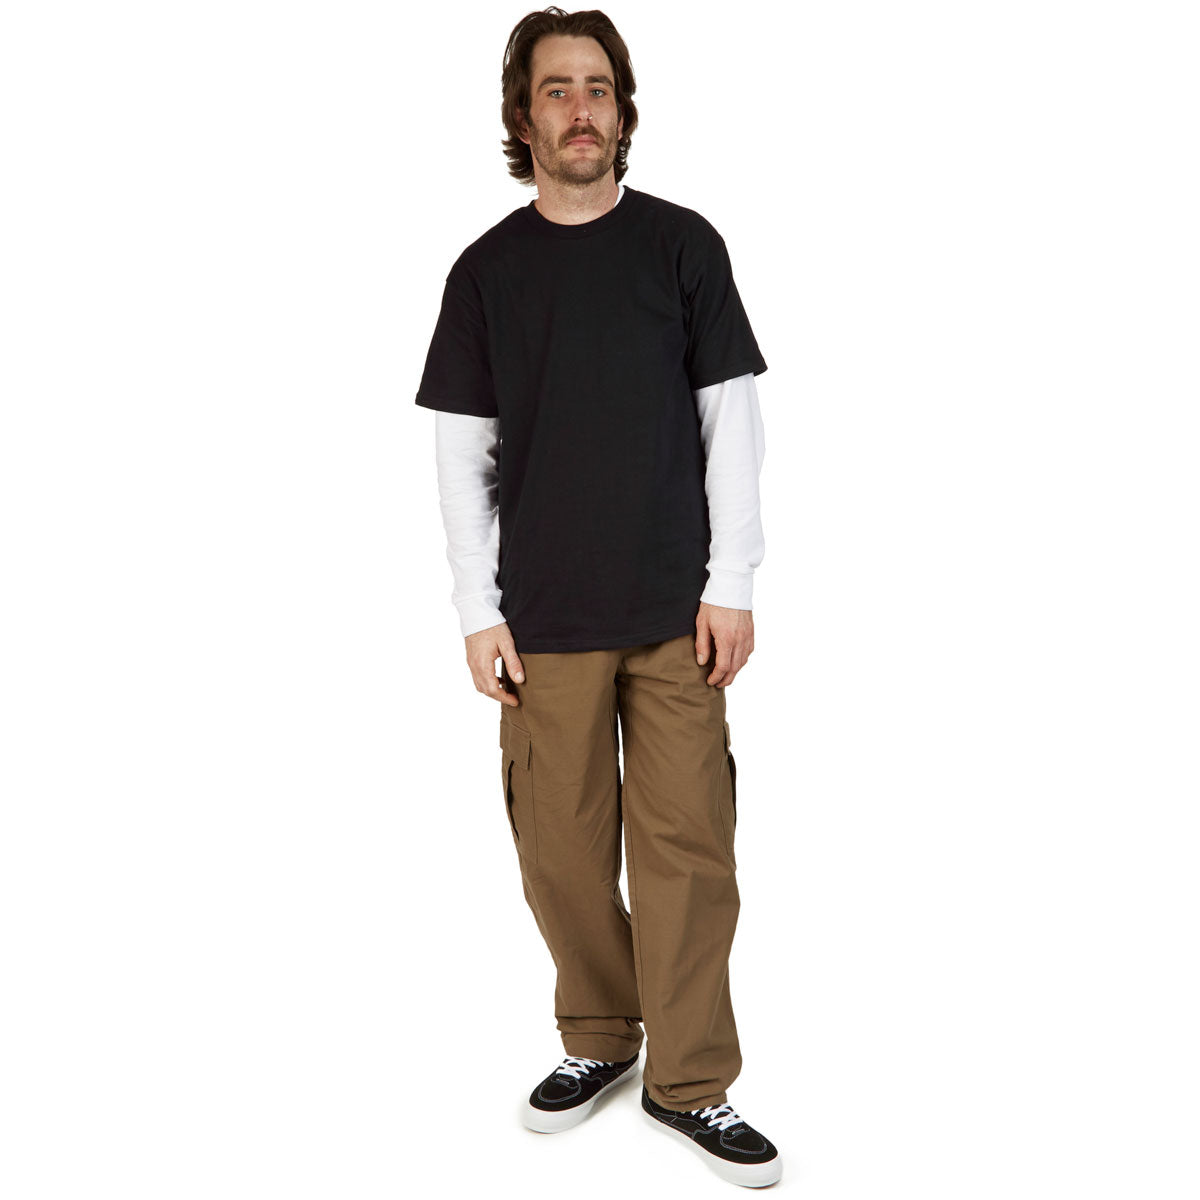 CCS Easy Ripstop Cargo Pants - Brown image 2